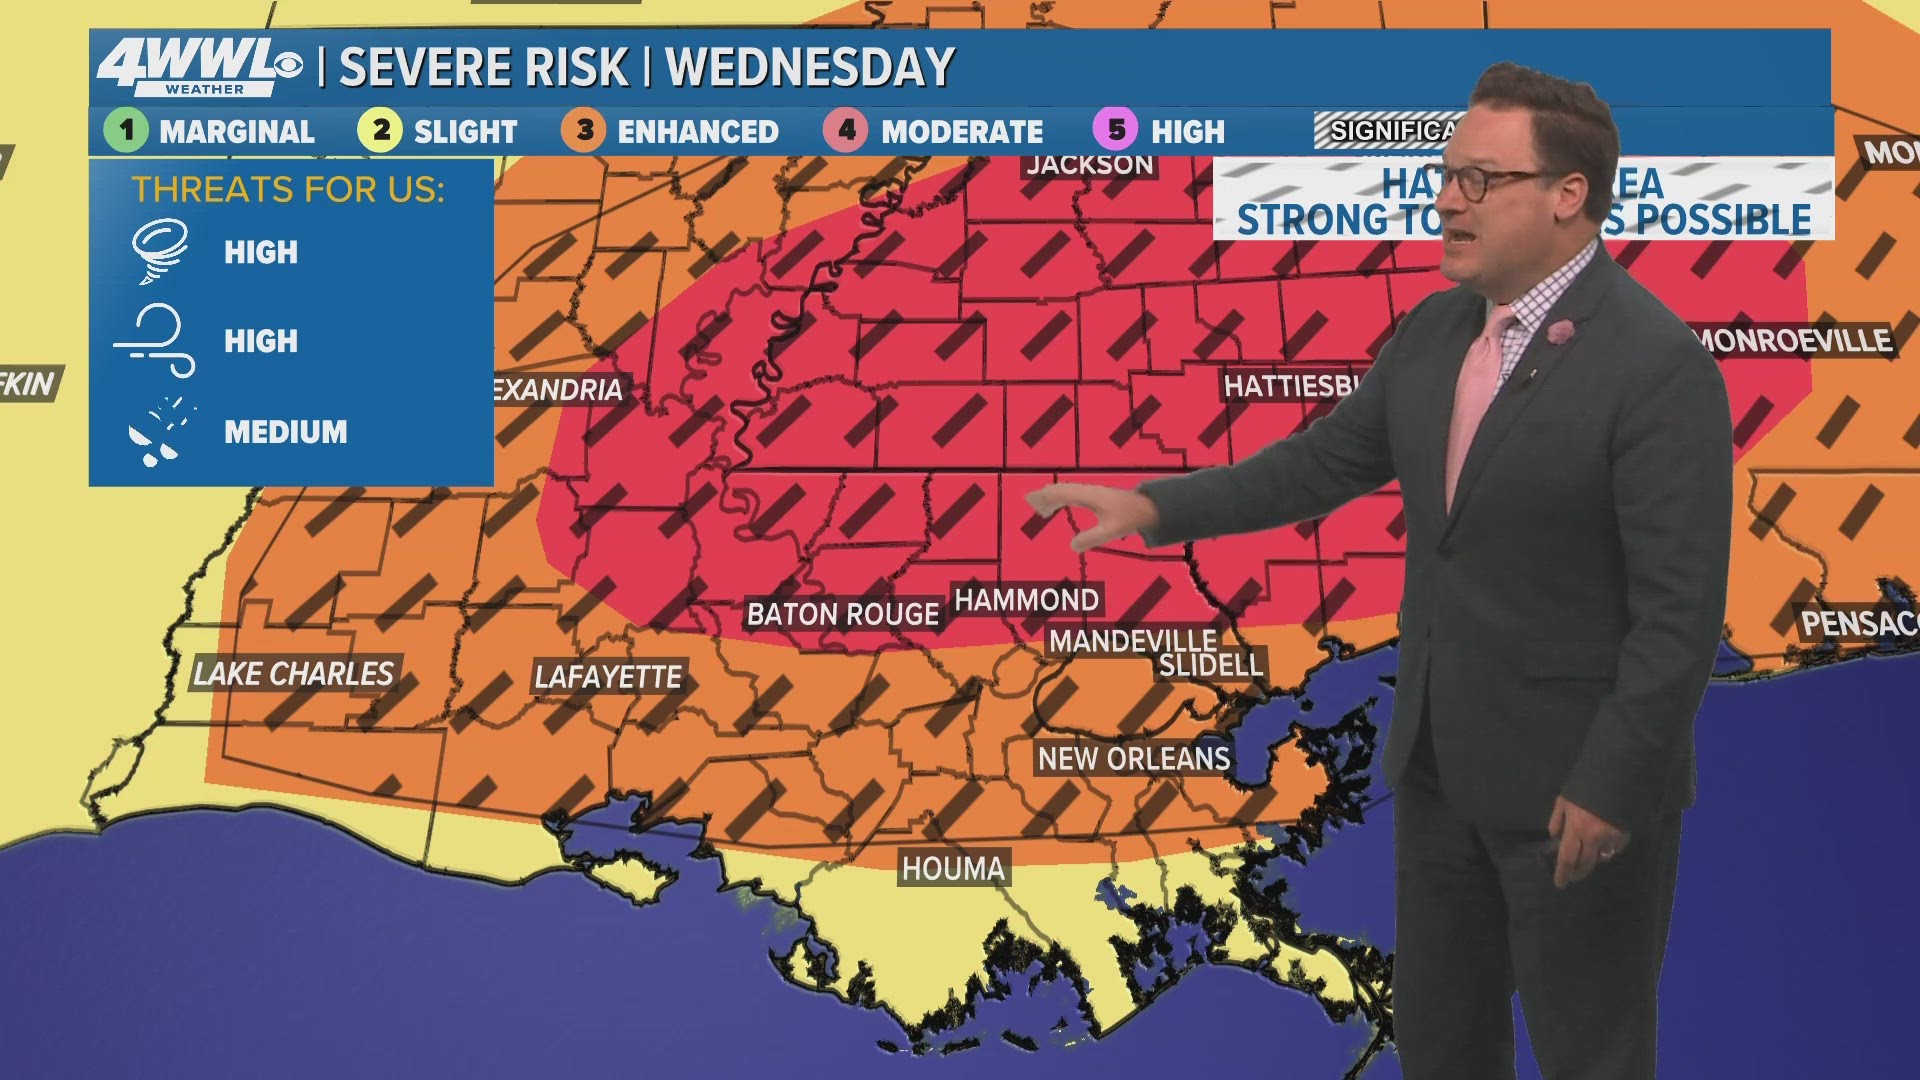 WWL Louisiana's complete coverage of the risk of severe weather that has been upgraded to levels 3 and 4 across the New Orleans area for Wednesday.